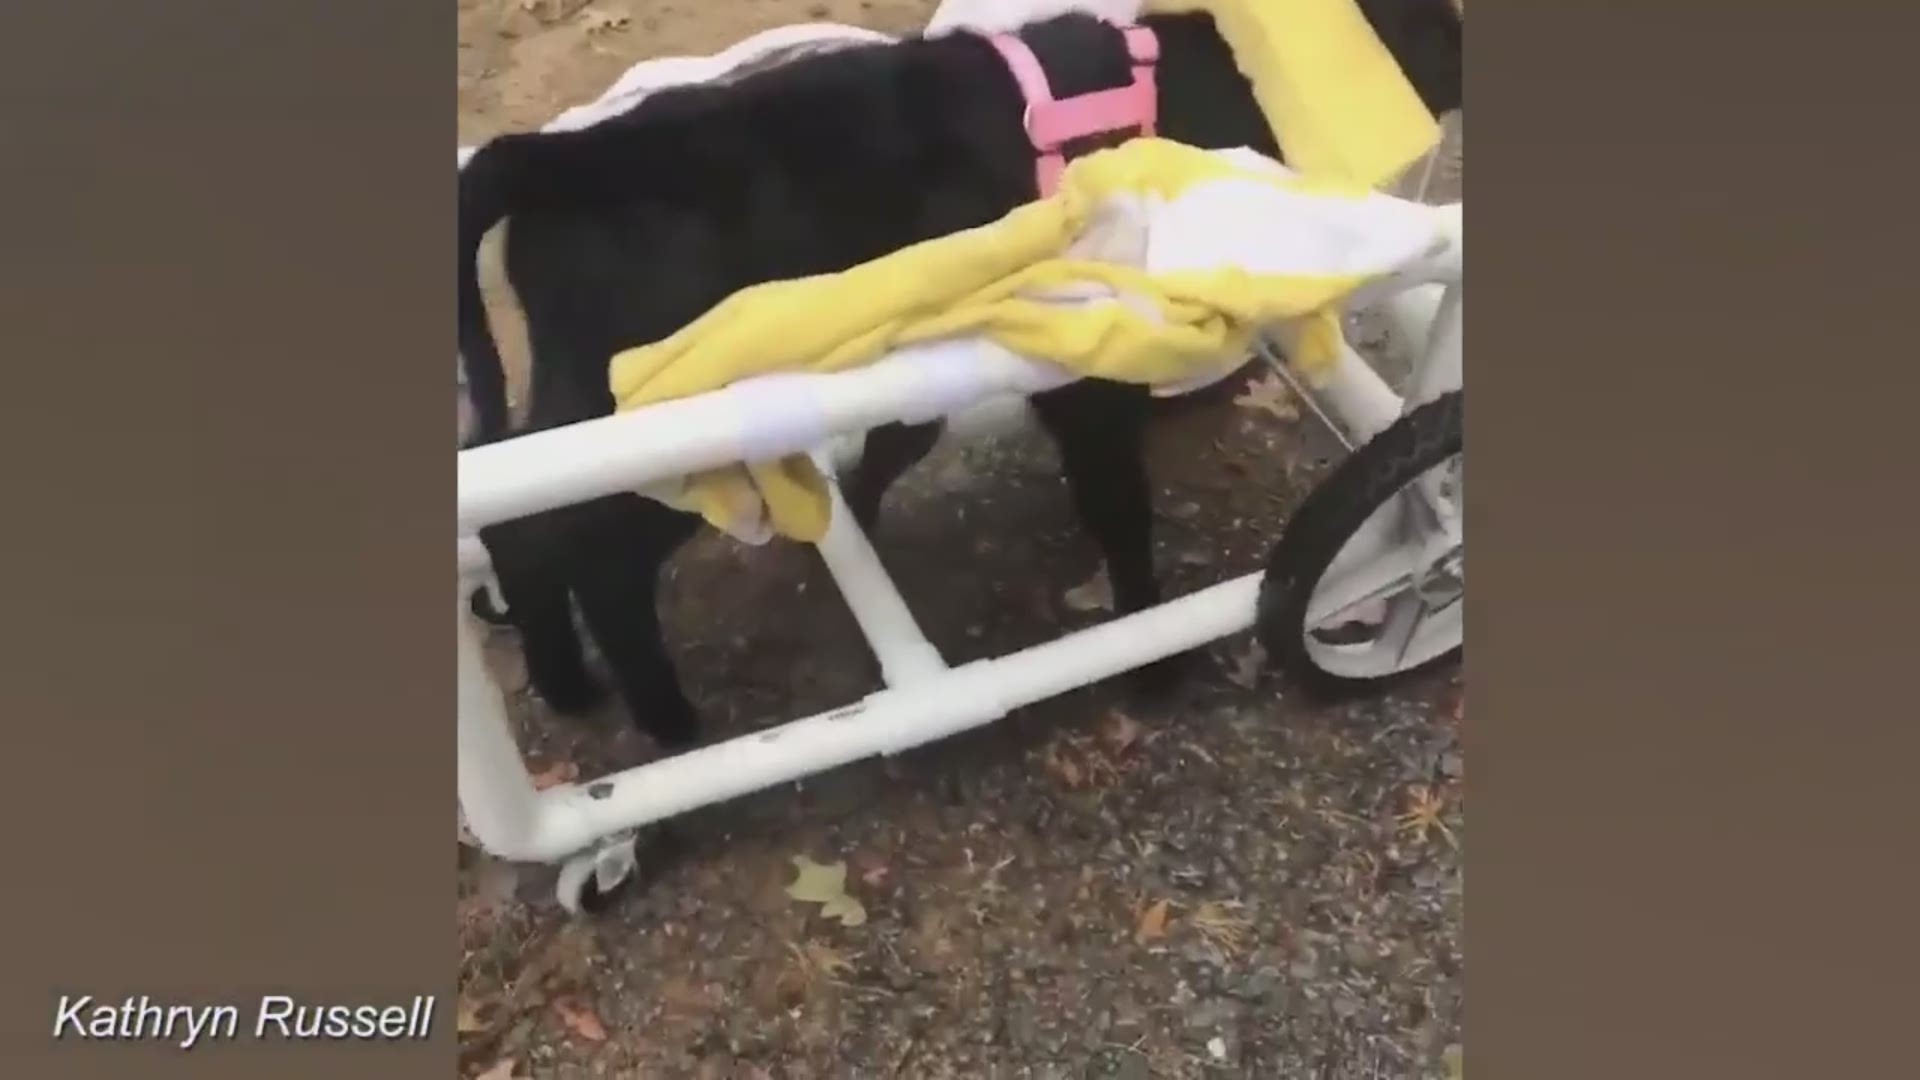 Unable to stand or properly lift her head to breathe or eat, the calf was likely to die. That’s when a Lowe’s employee went above and beyond to help the calf.